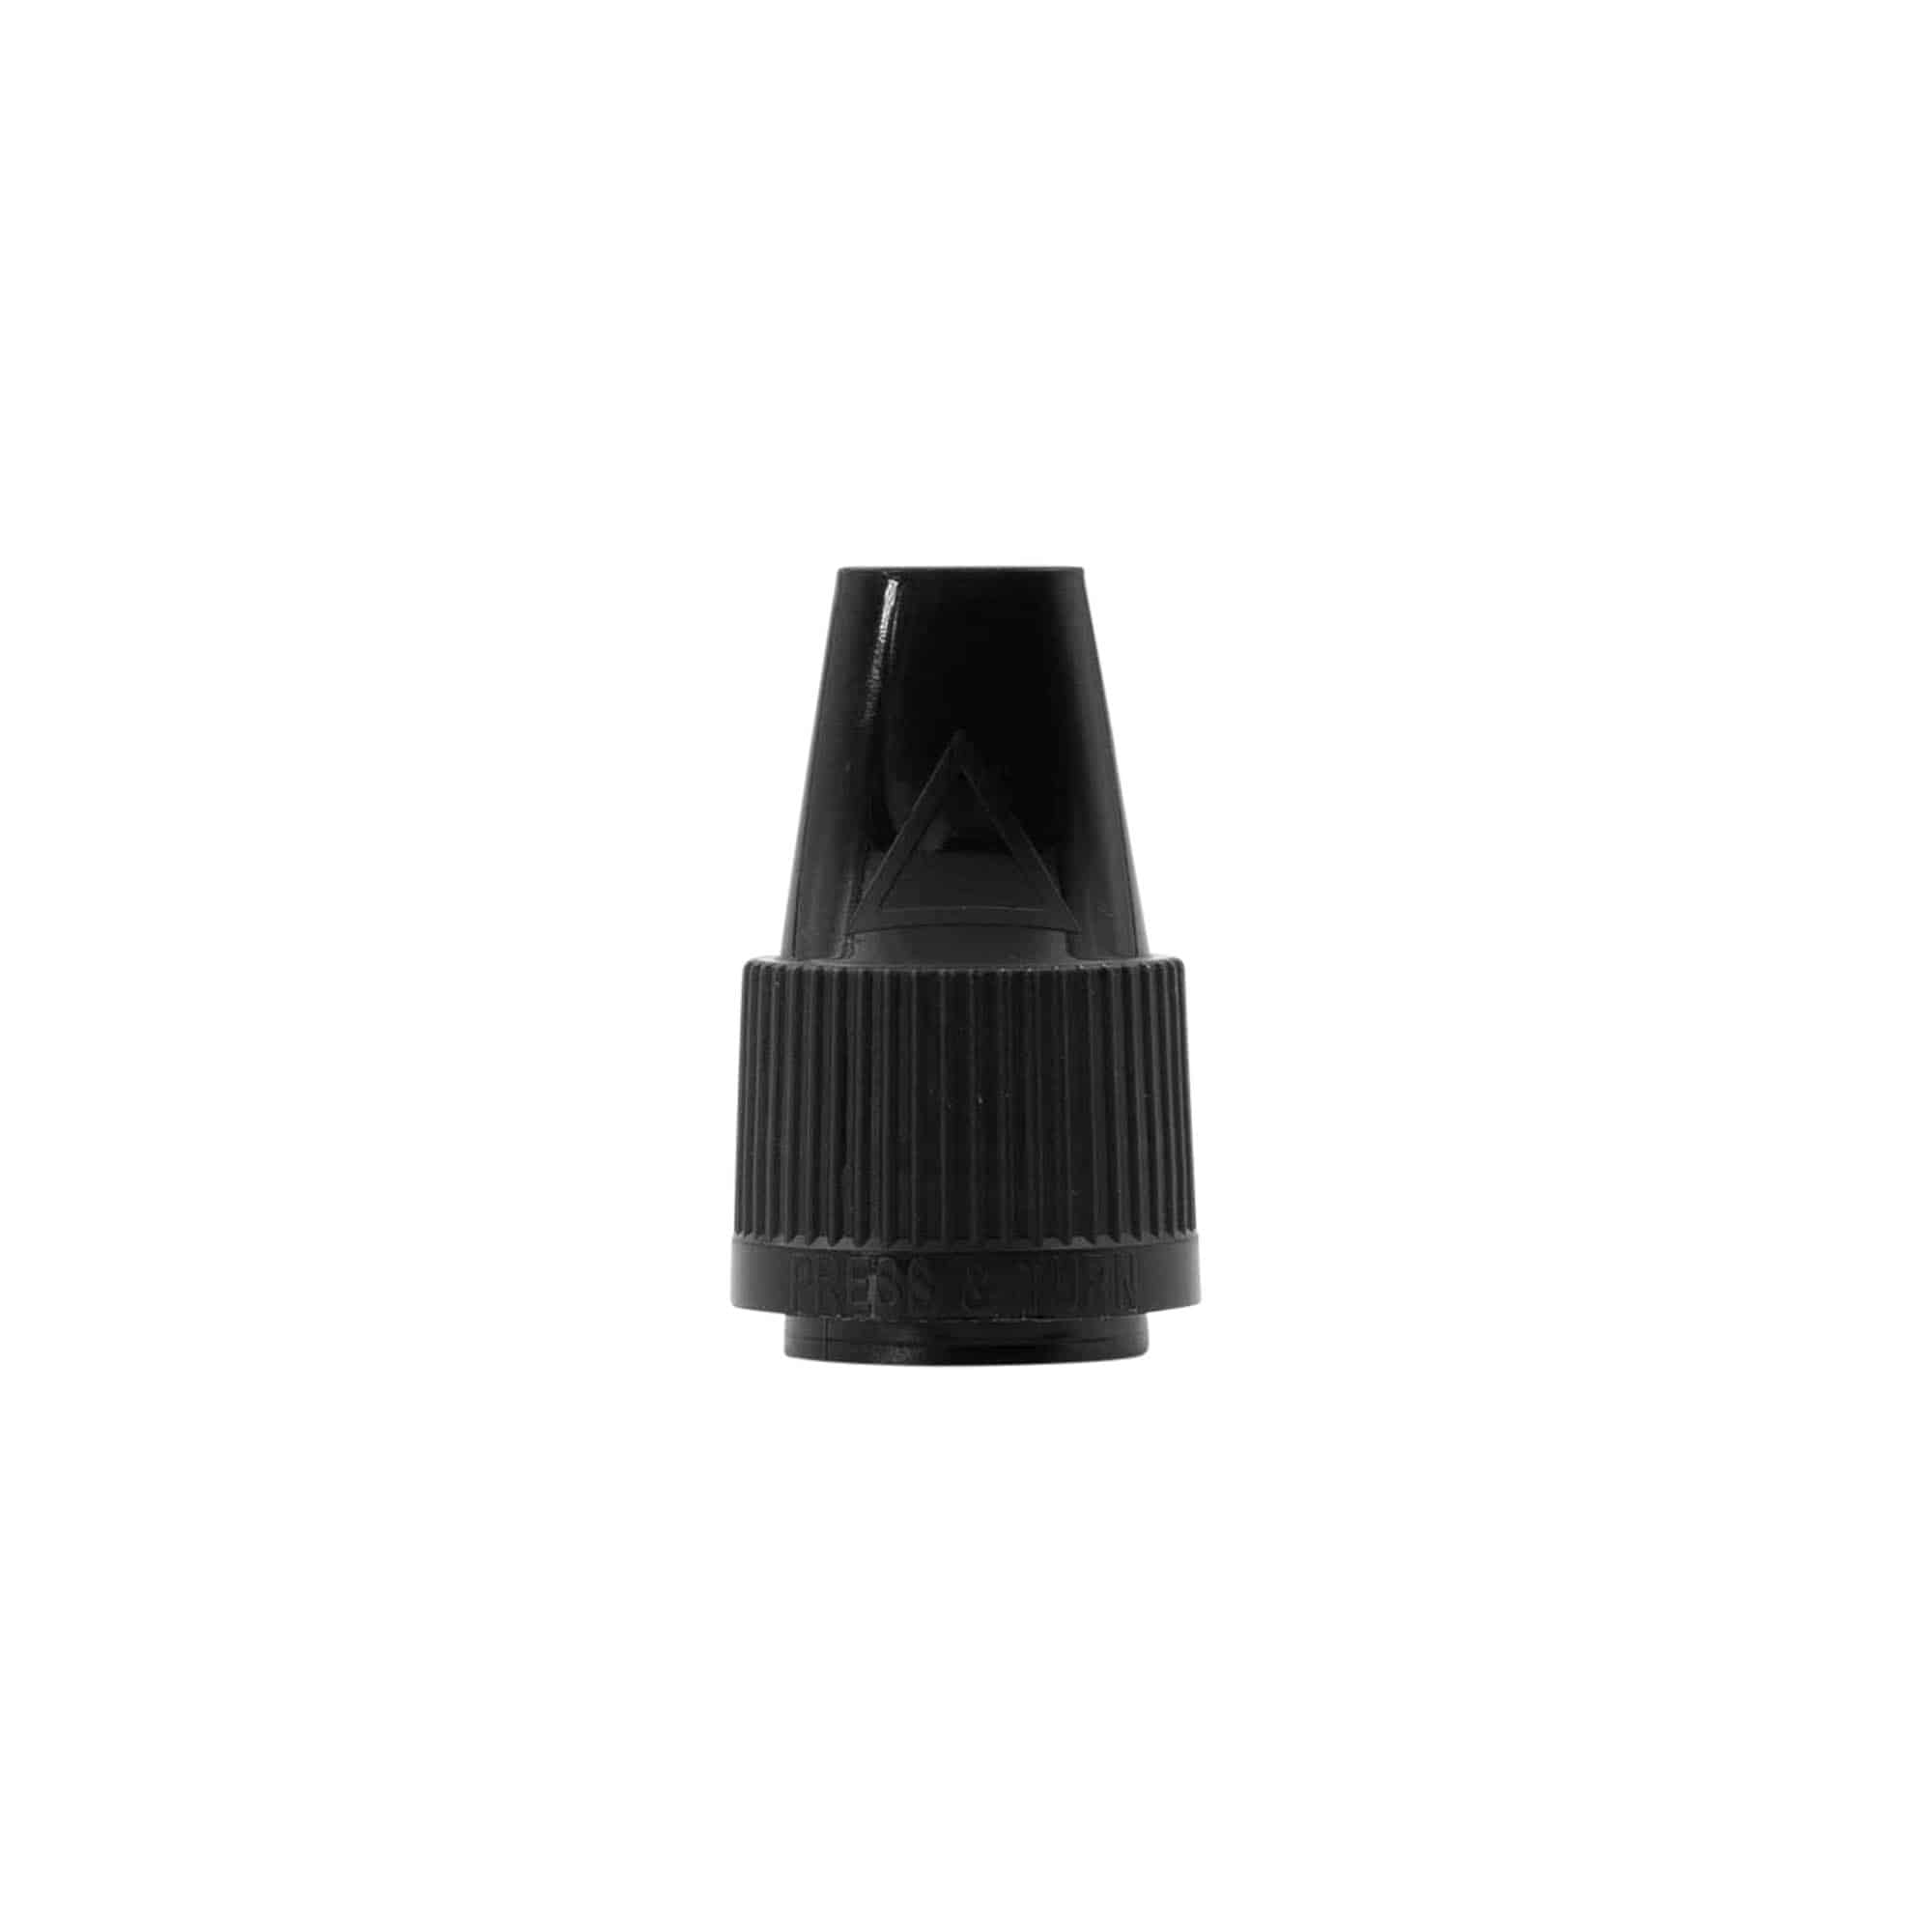 Screw cap with quality seal and child safety lock for 'E-Liquid', PP plastic, black